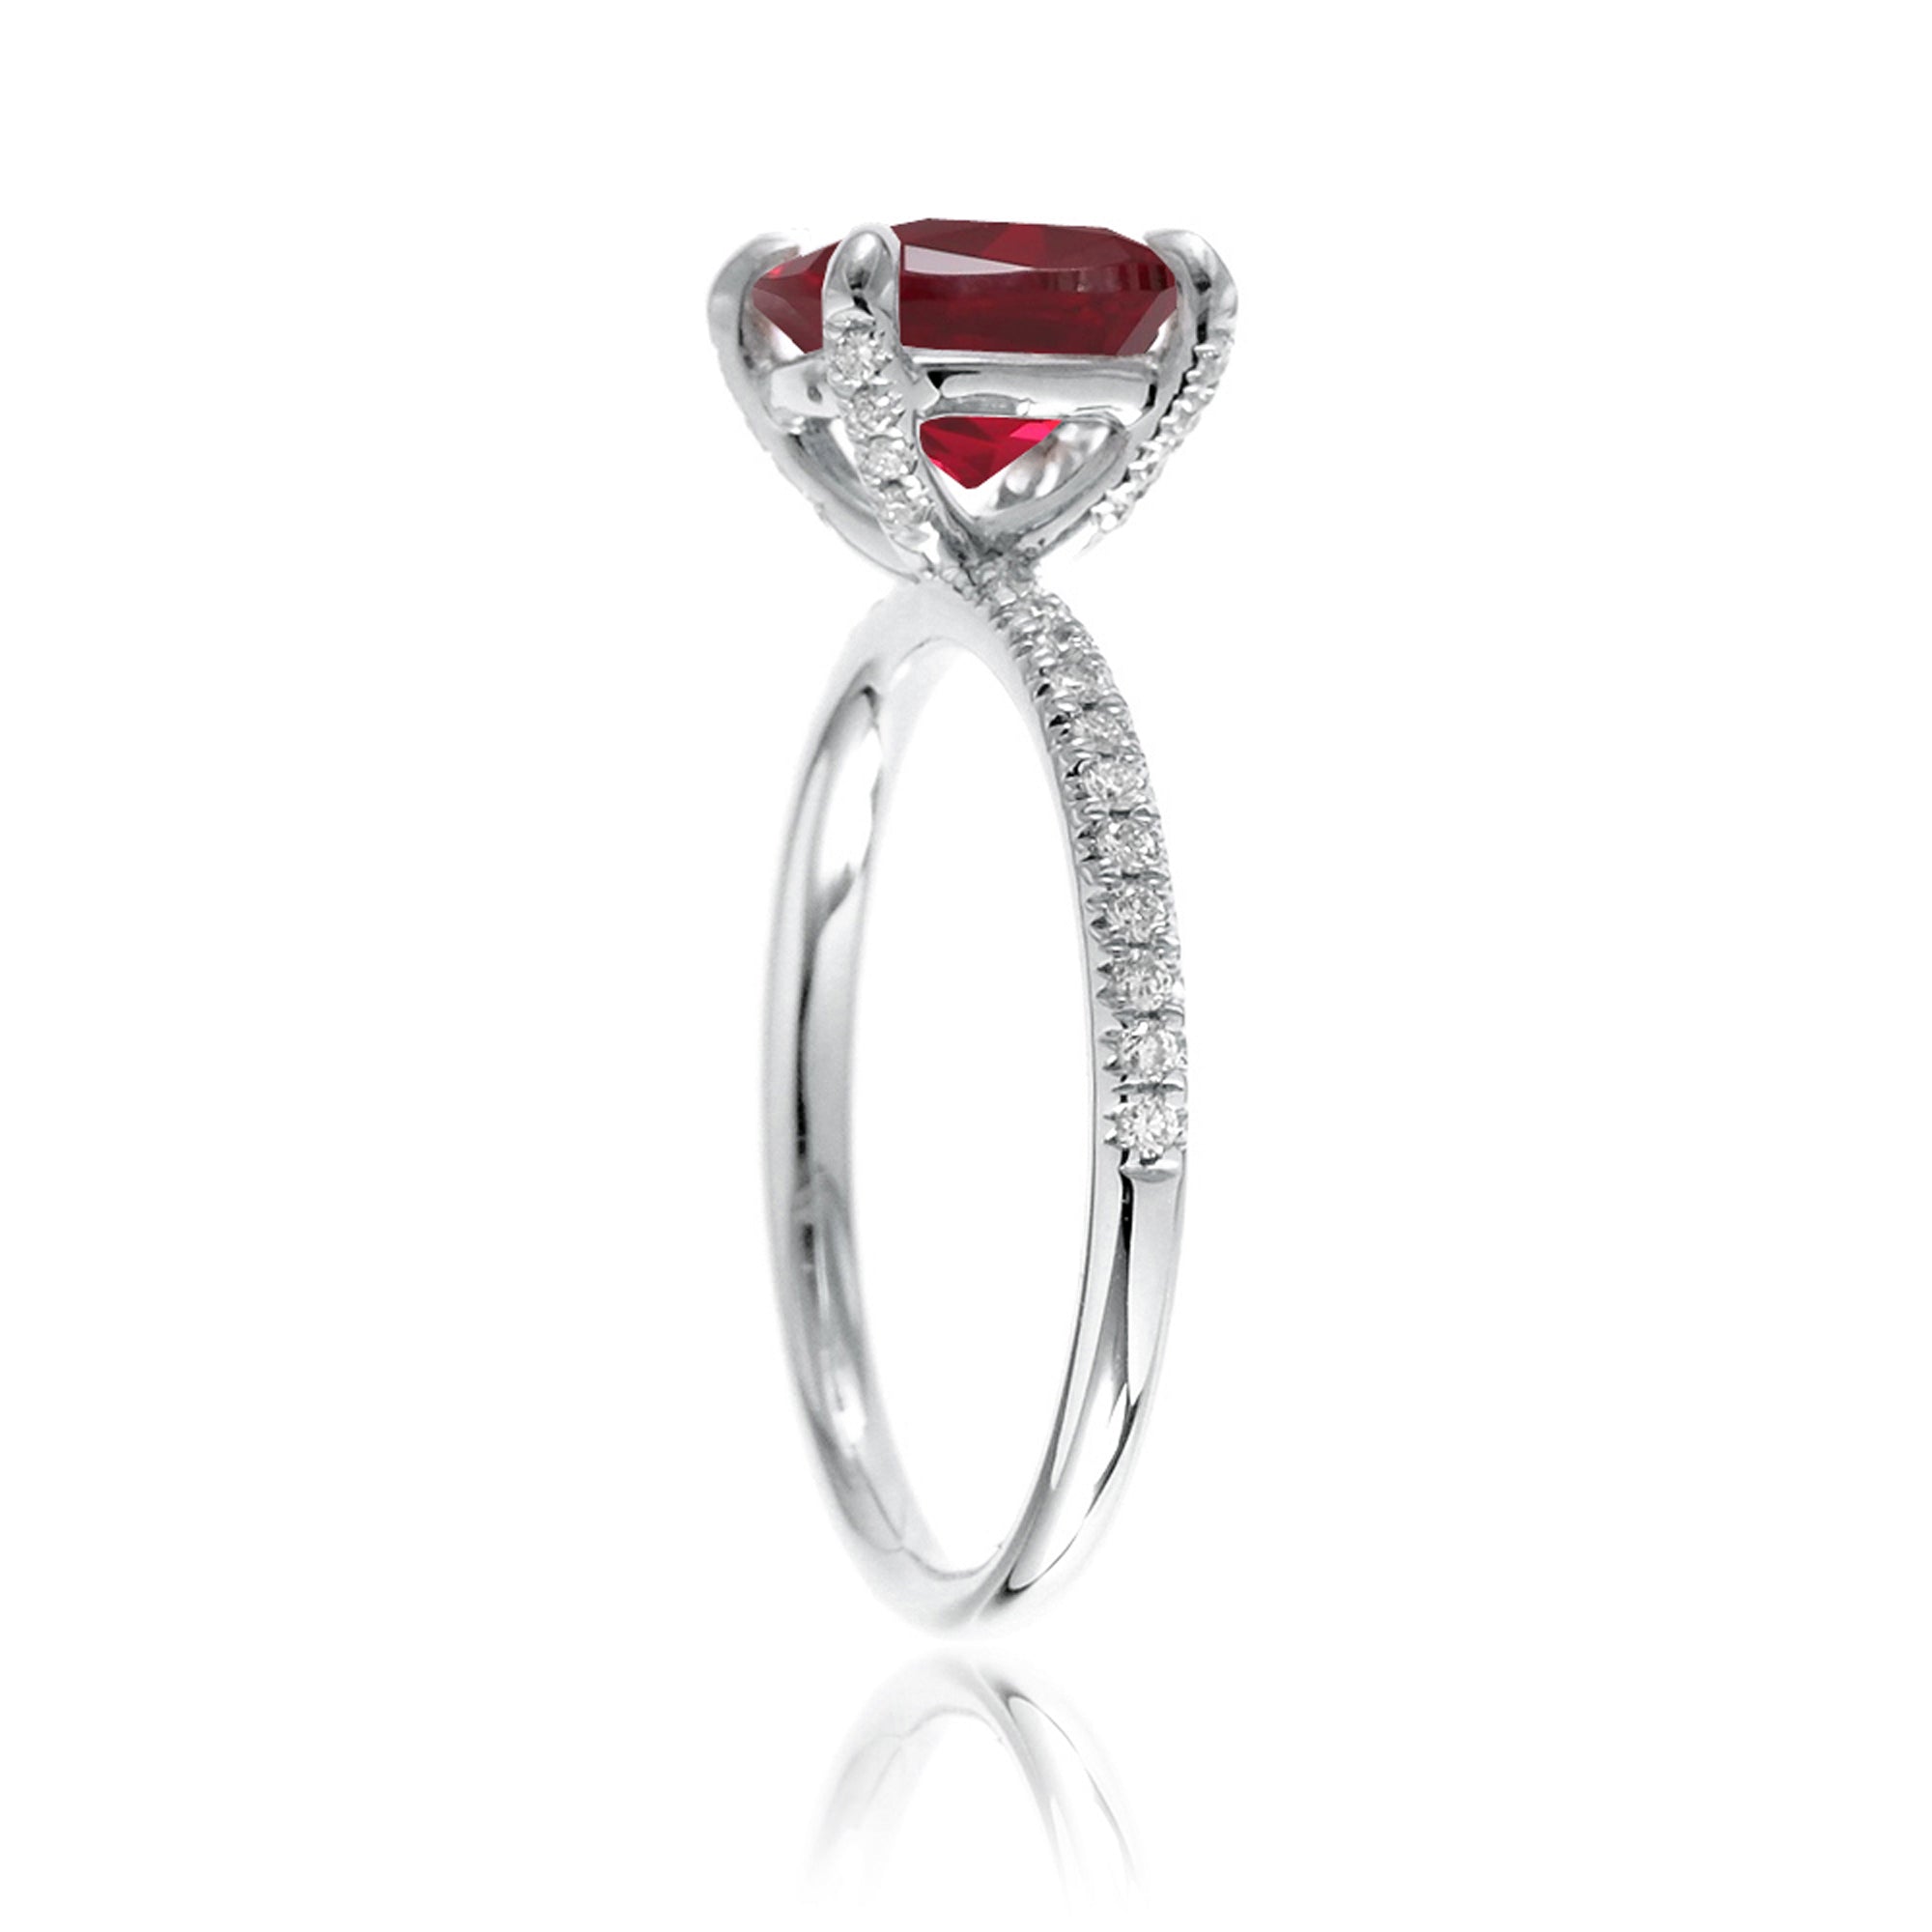 The Ava Emerald Cut Ruby Ring (Lab Grown)